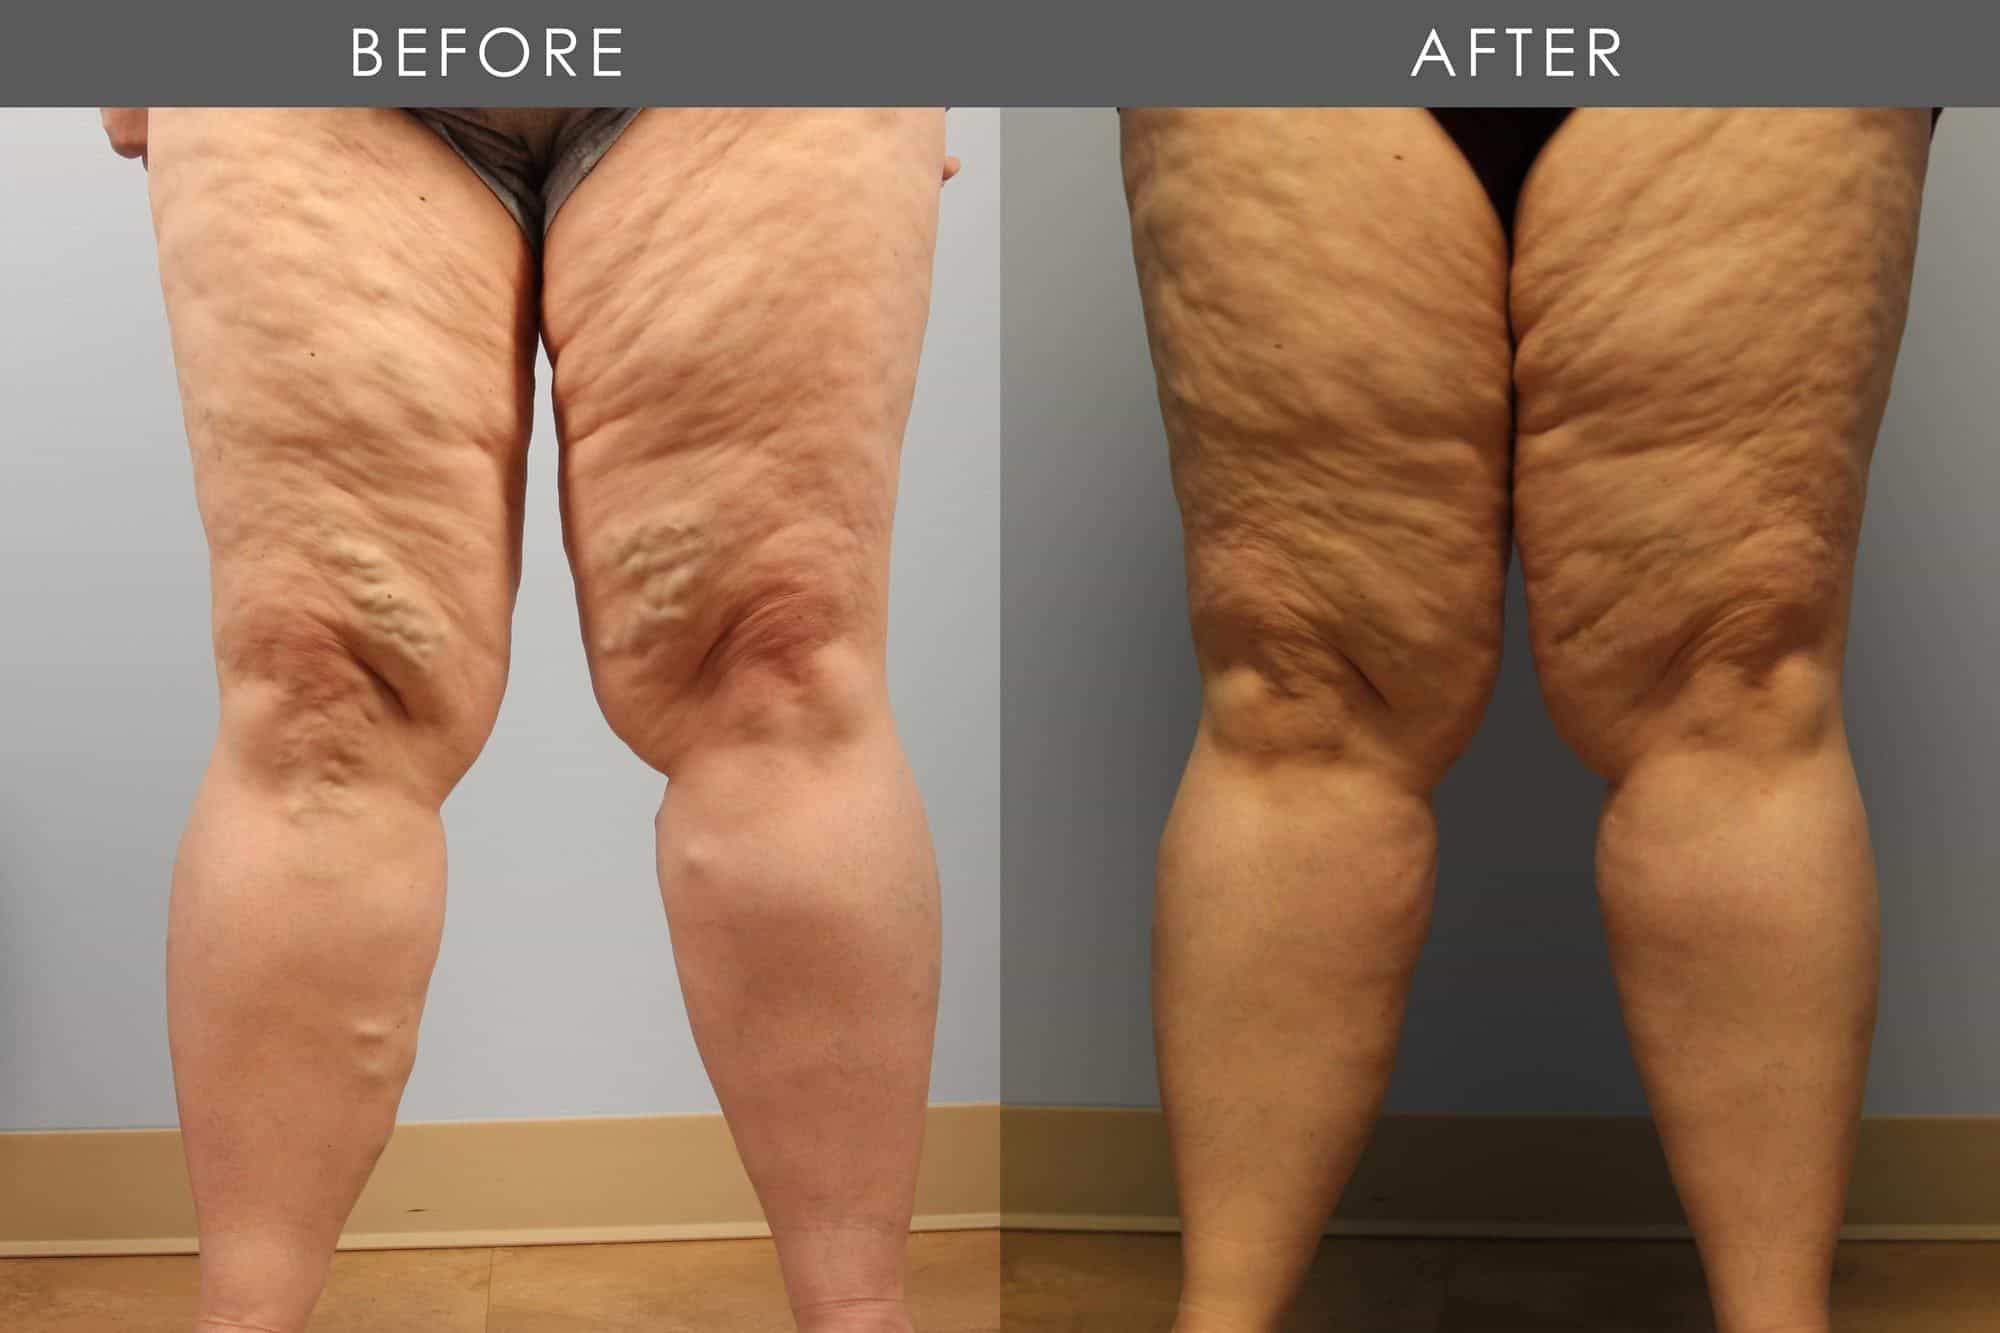 Before and After Varicose Vein Treatment treatment #2